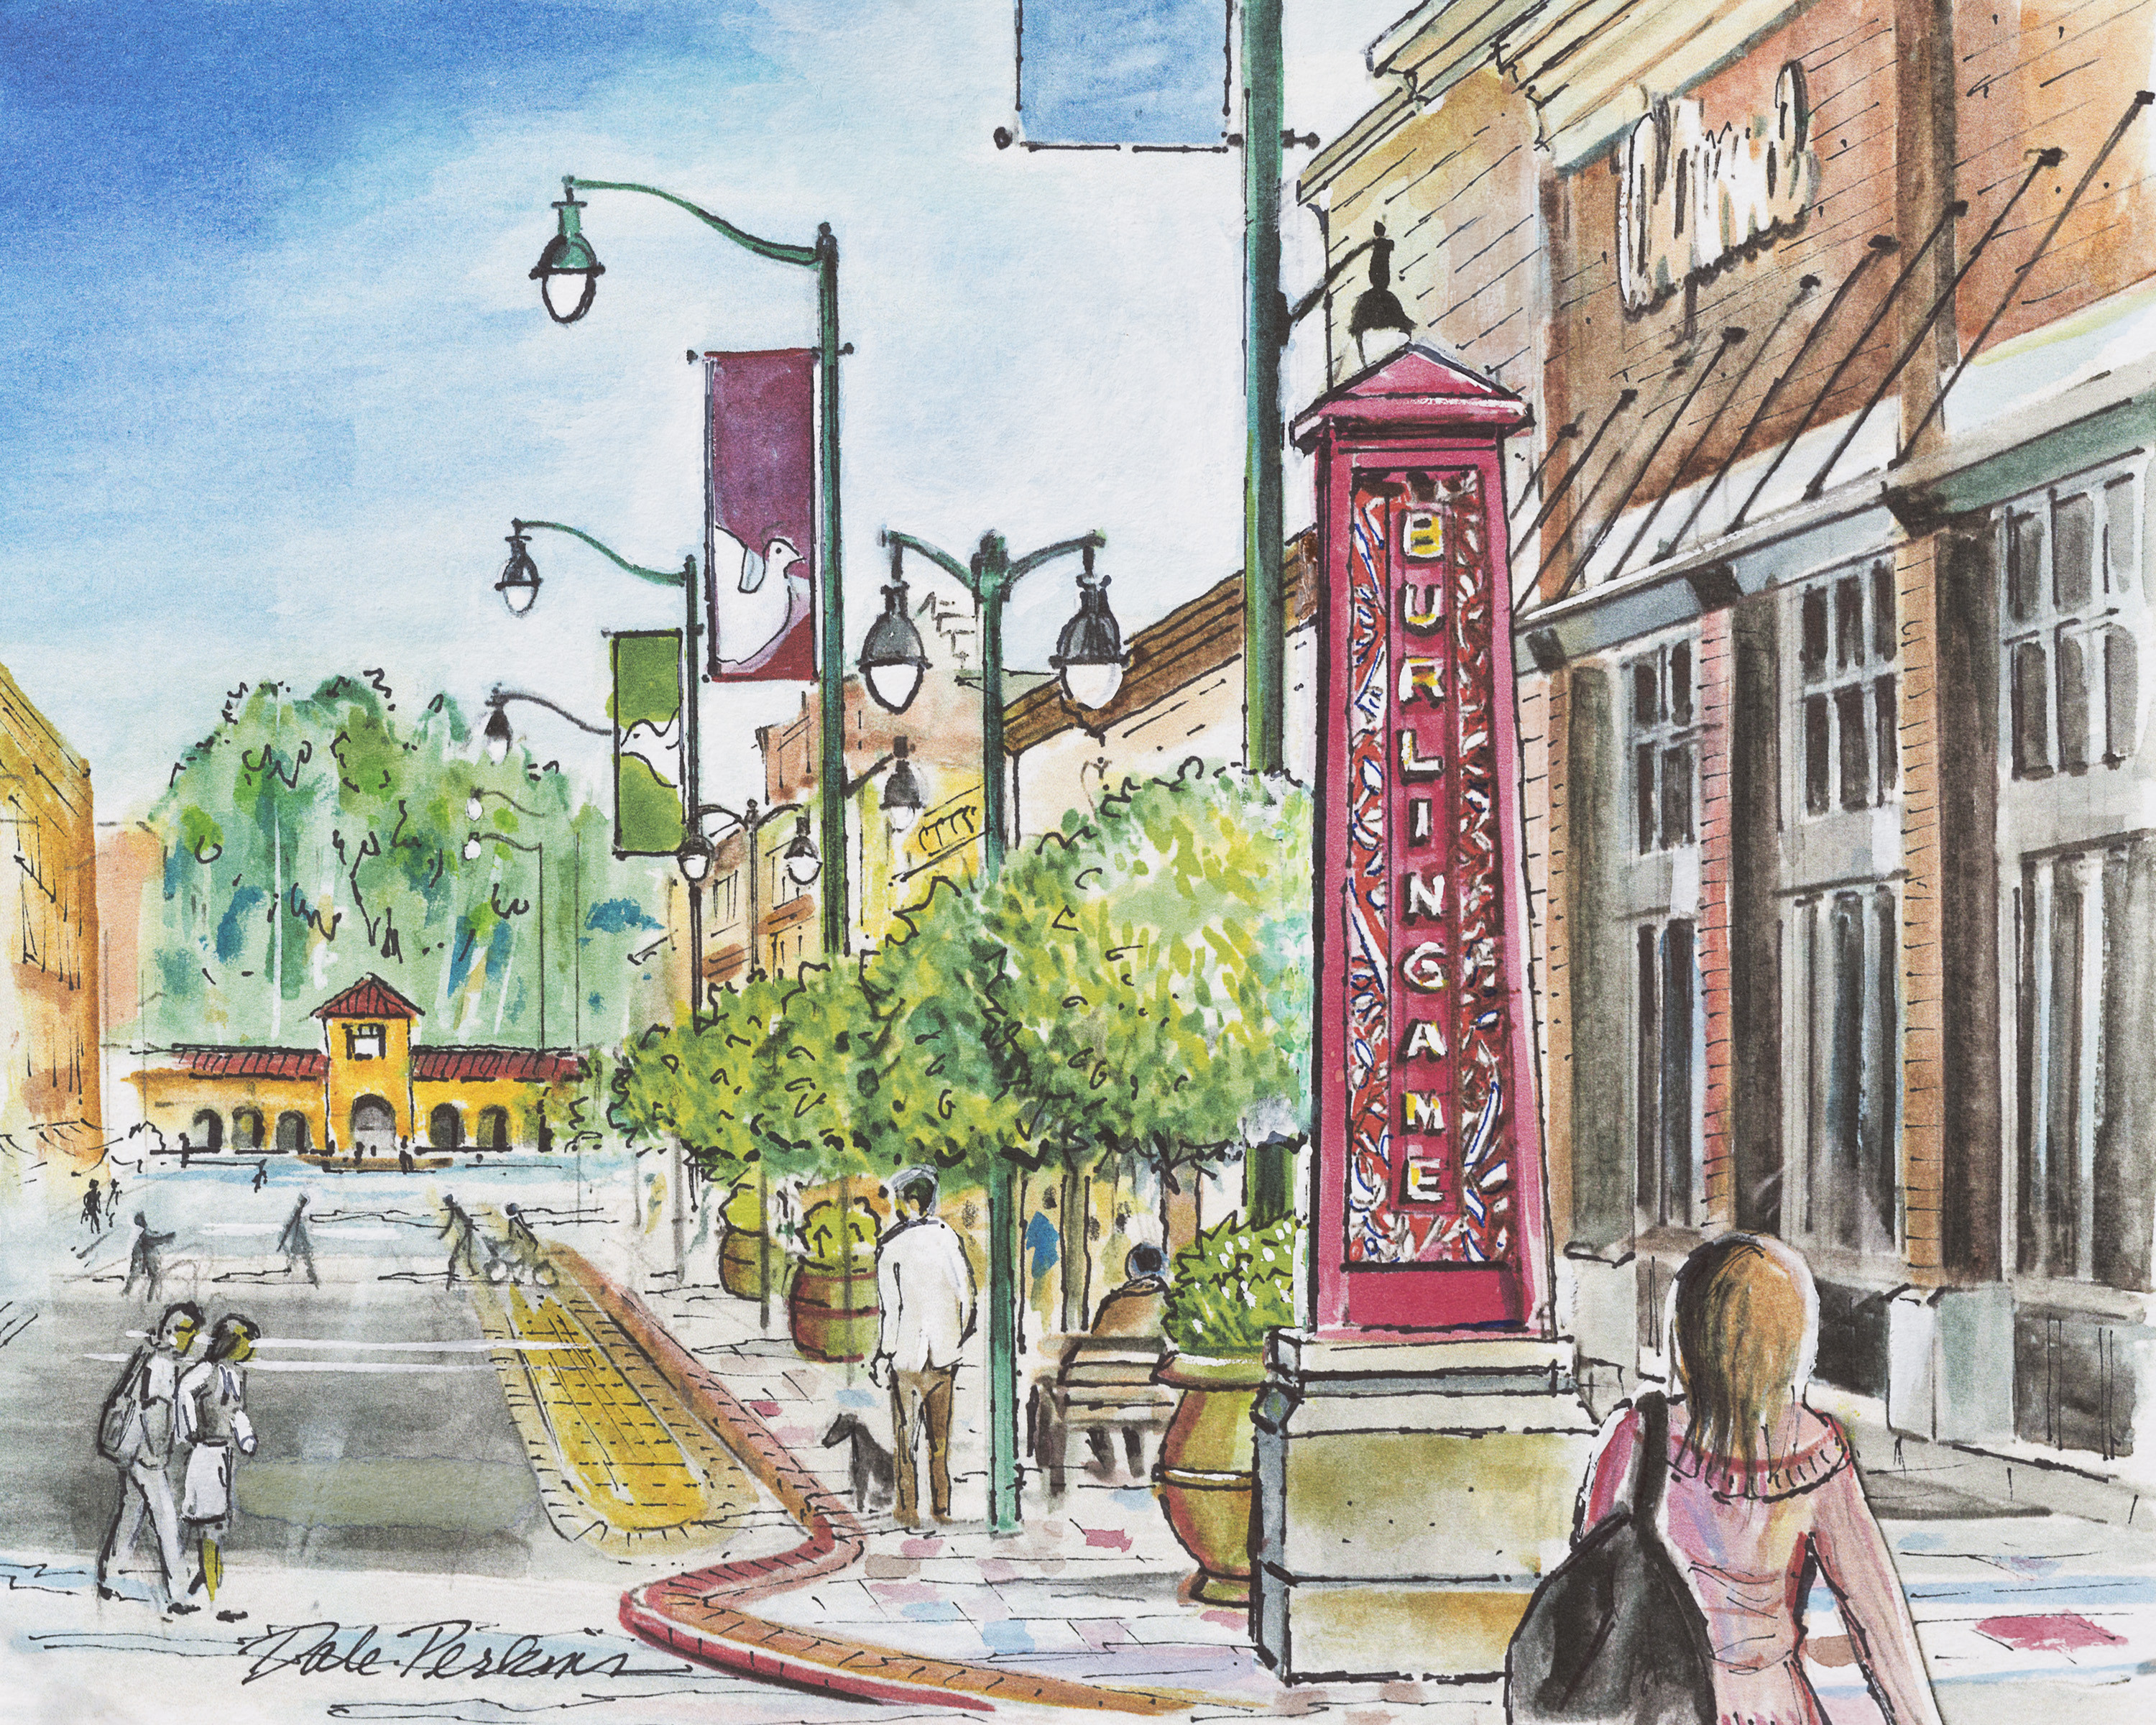 Downtown Burlingame Illustration by Dale Perkins